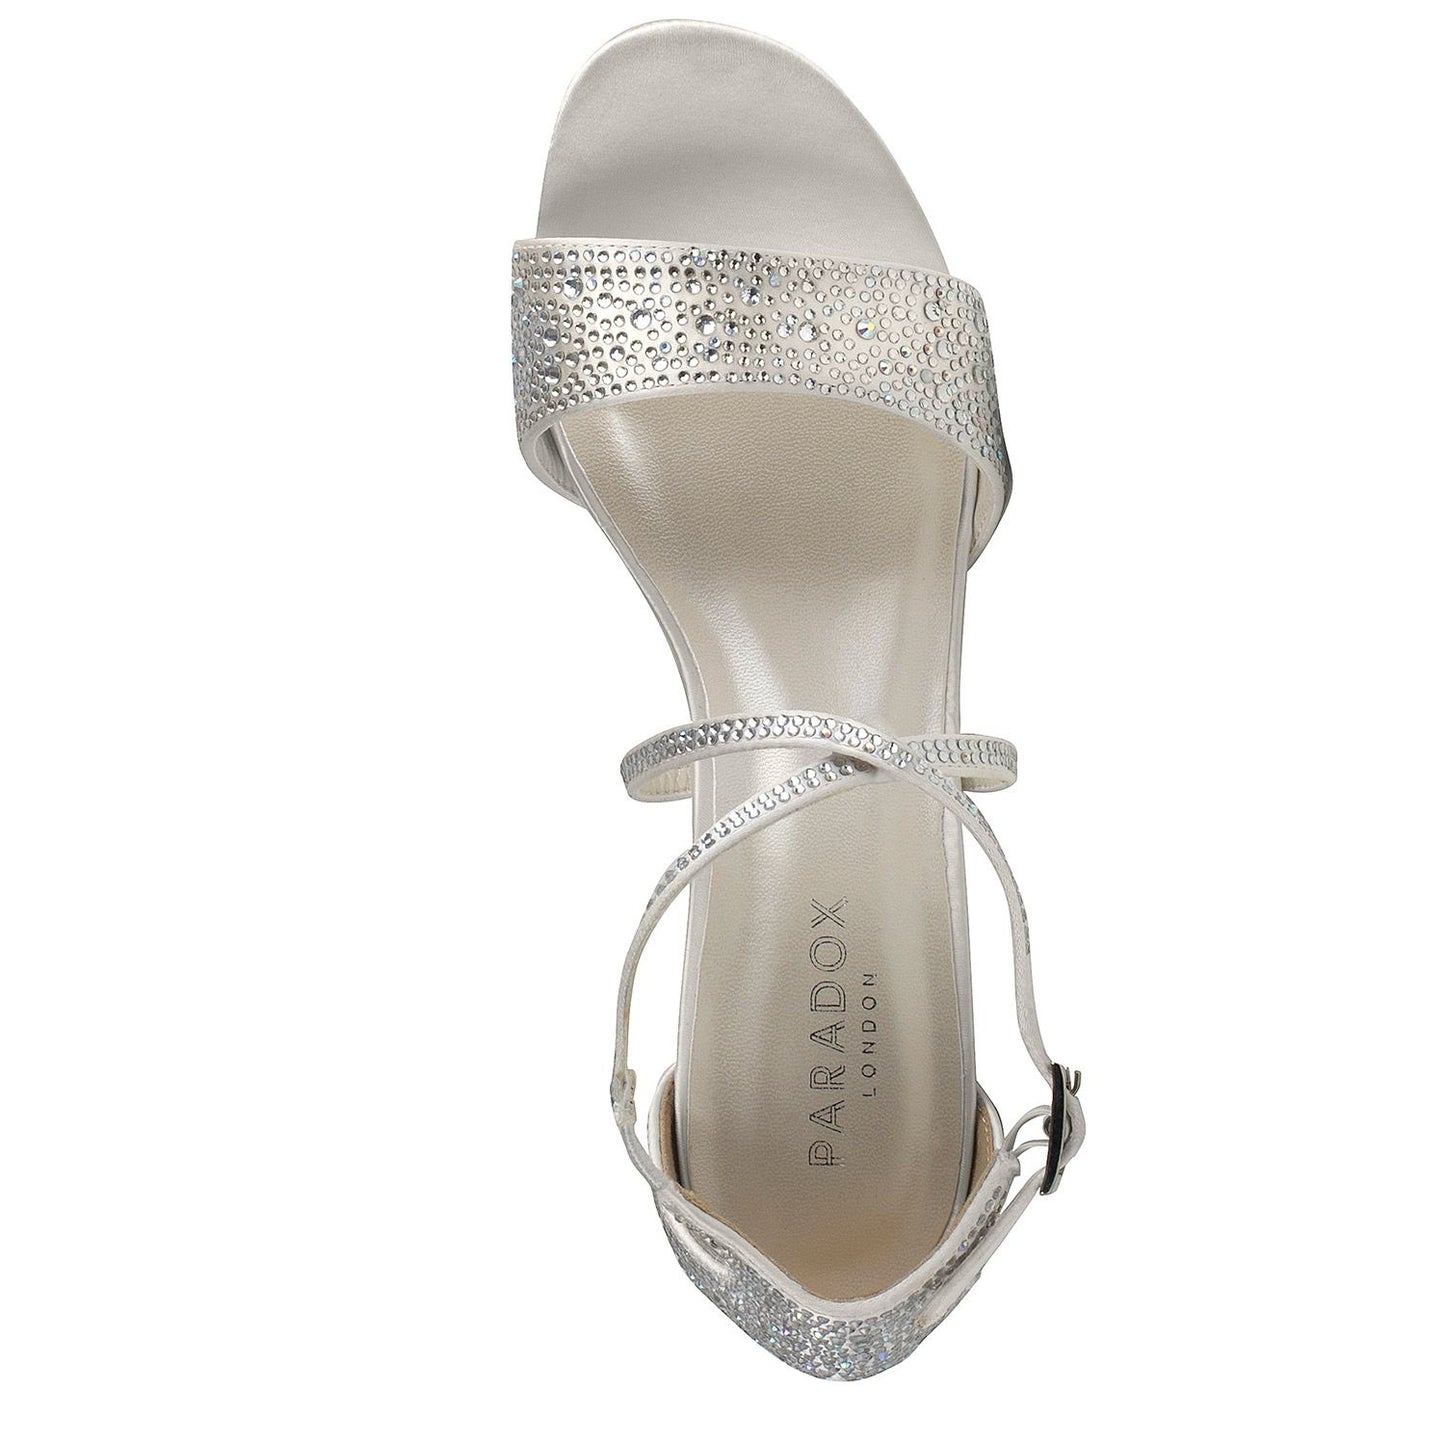 Overhead view of Shimmer shoe with 2 inch block heel and elegant stones